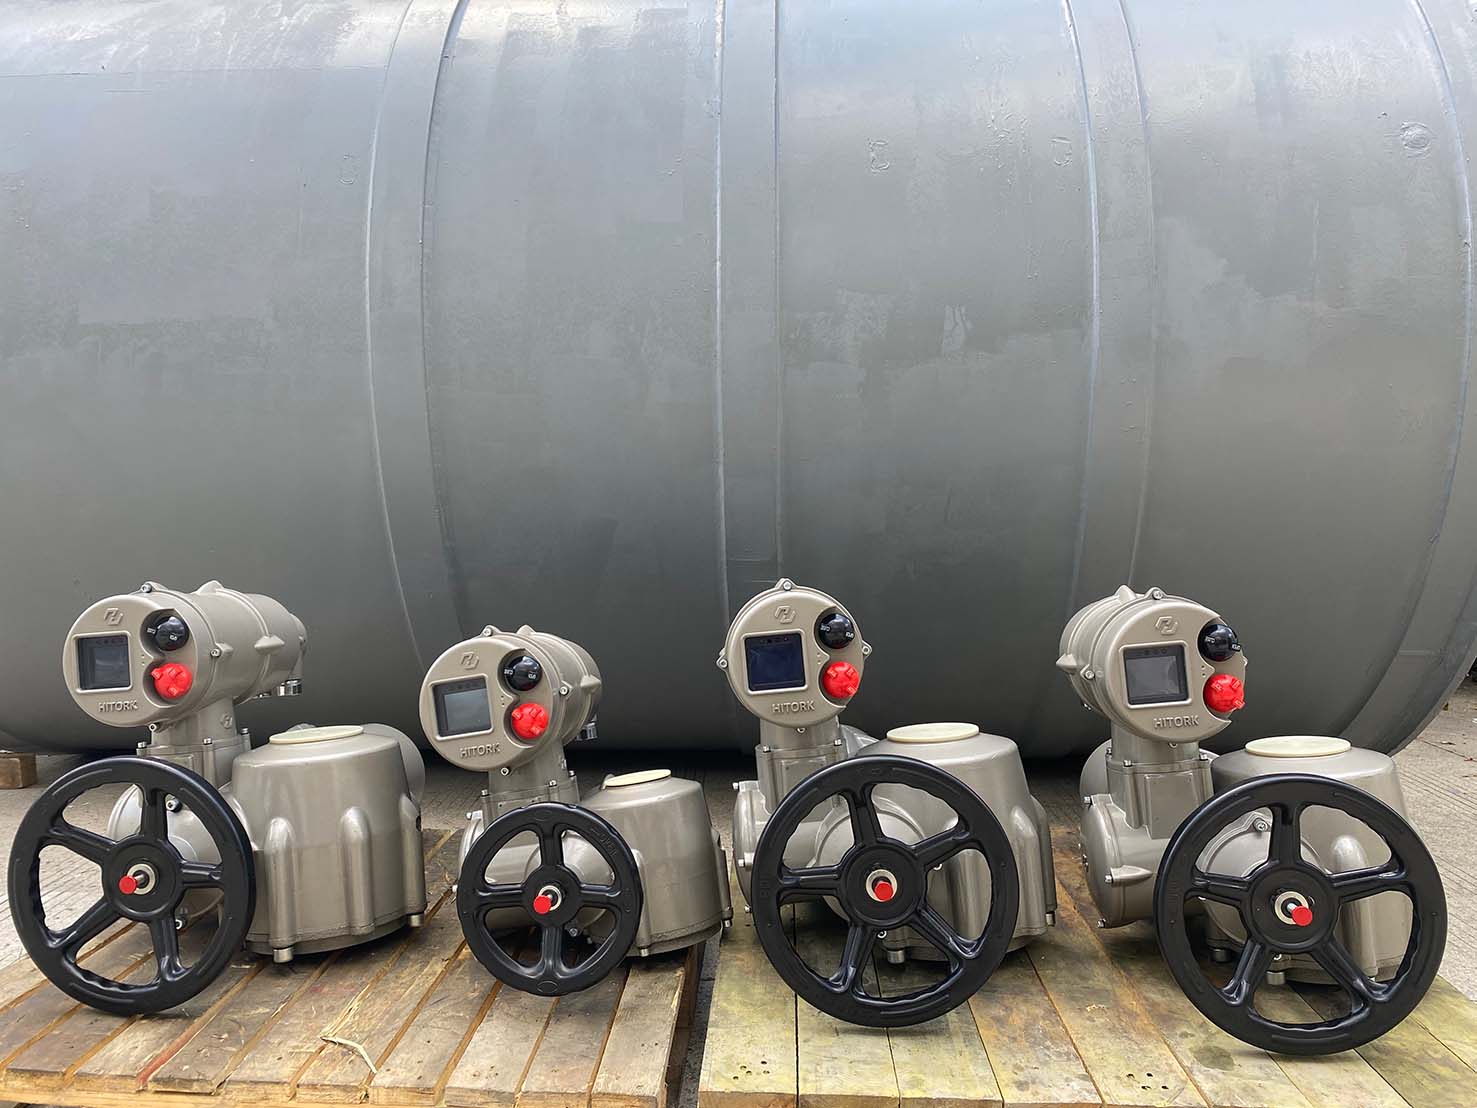 HITORK actuators are used in pu water treatment project